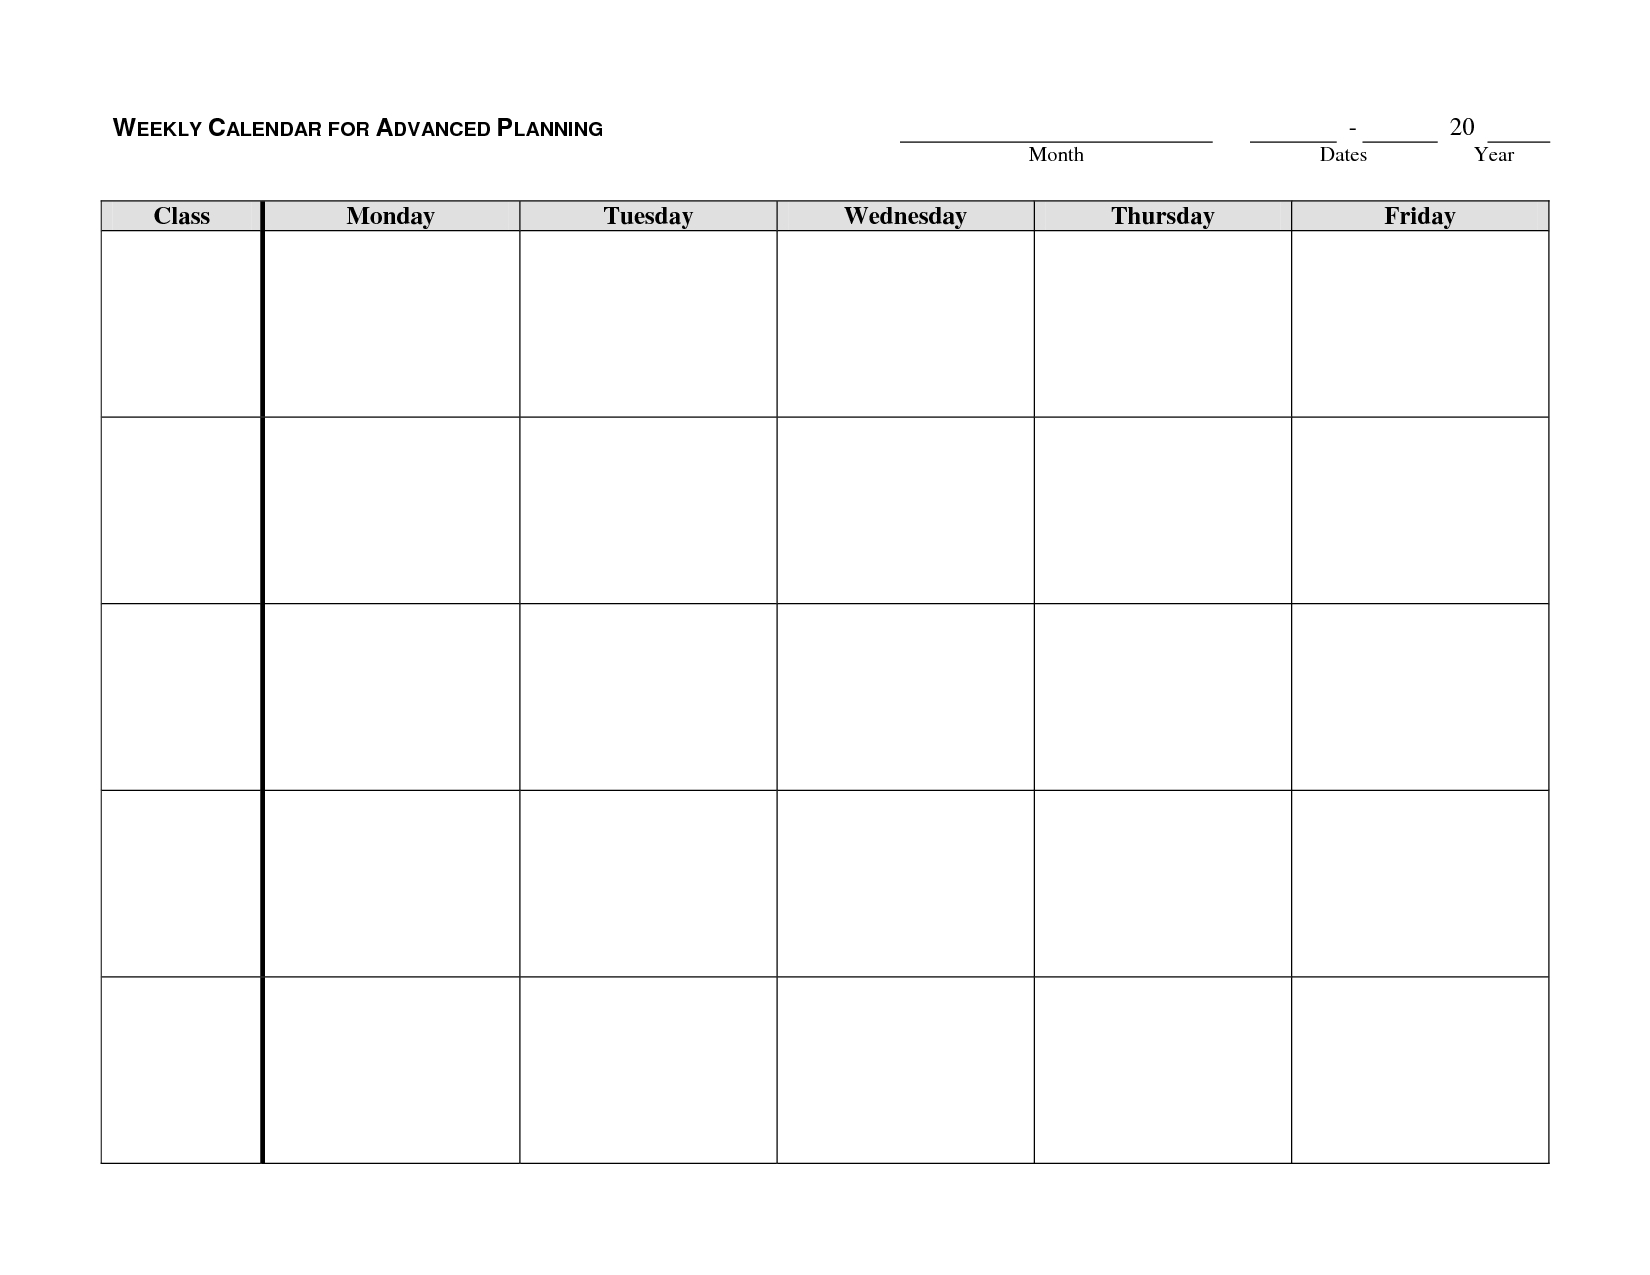 Monday To Friday Monthly Calendar Template | Monthly throughout Calendar Template Monday Through Friday